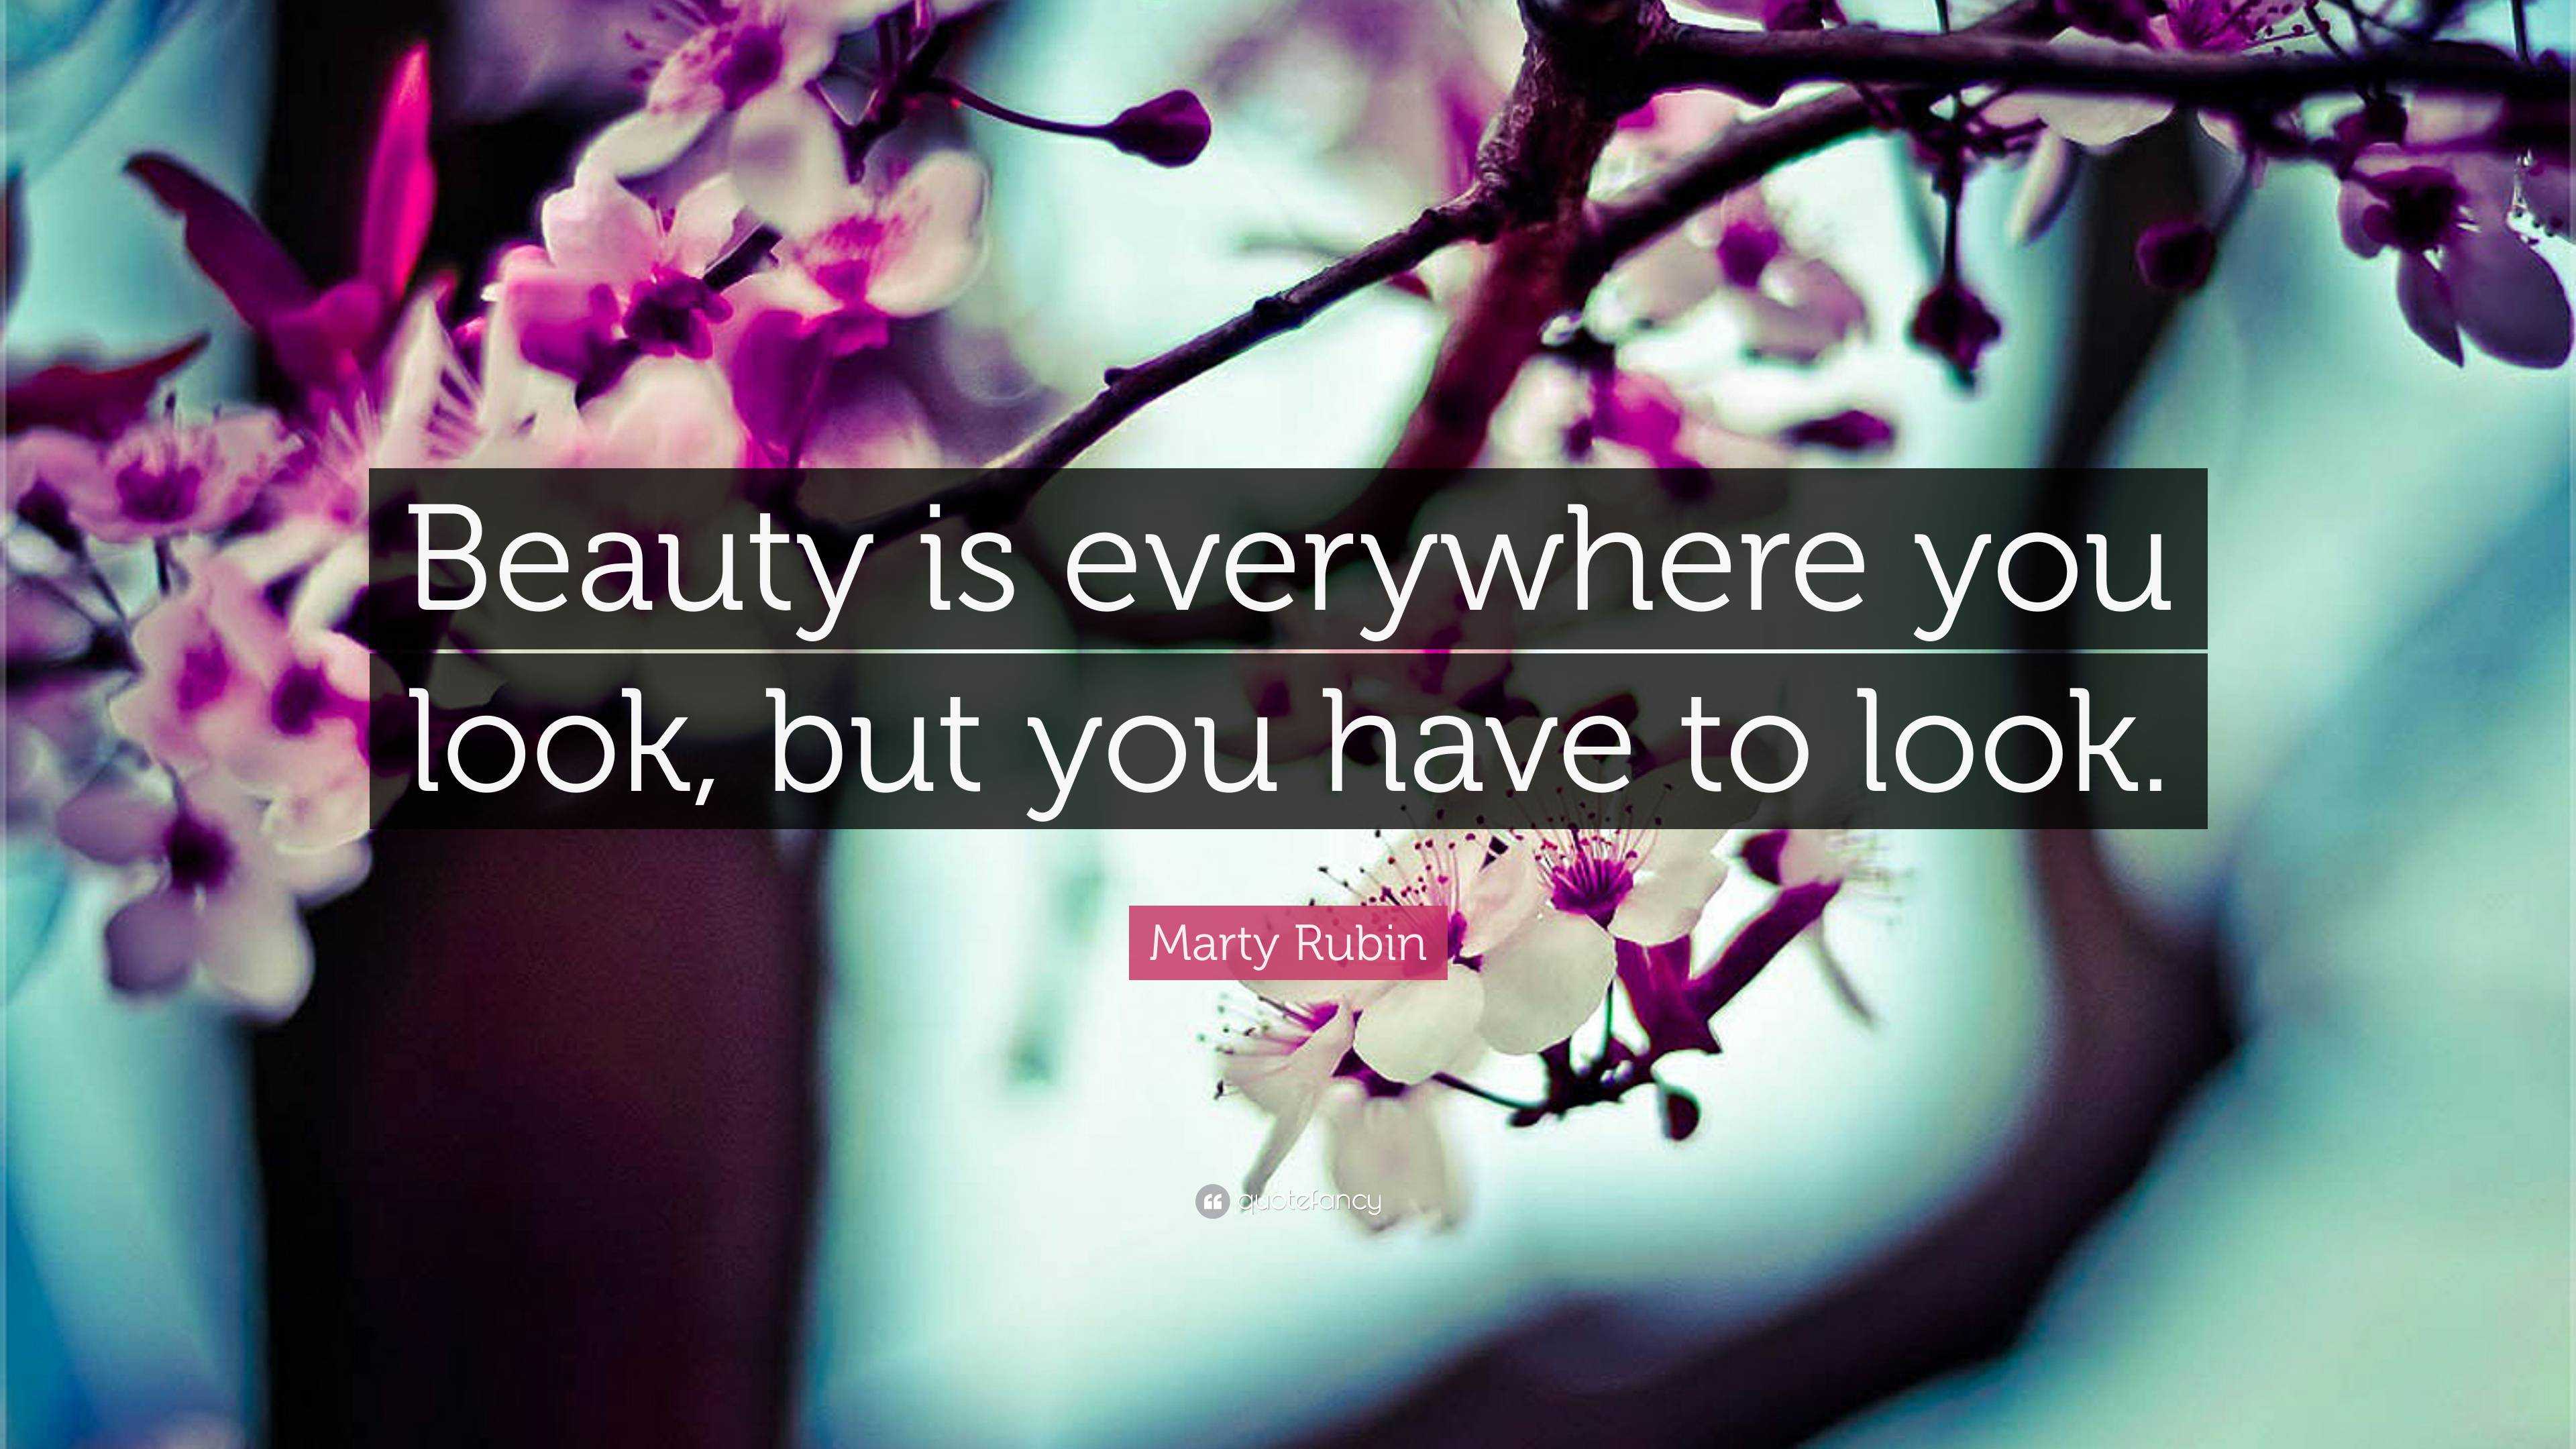 Marty Rubin Quote: “Beauty is everywhere you look, but you have to look.”